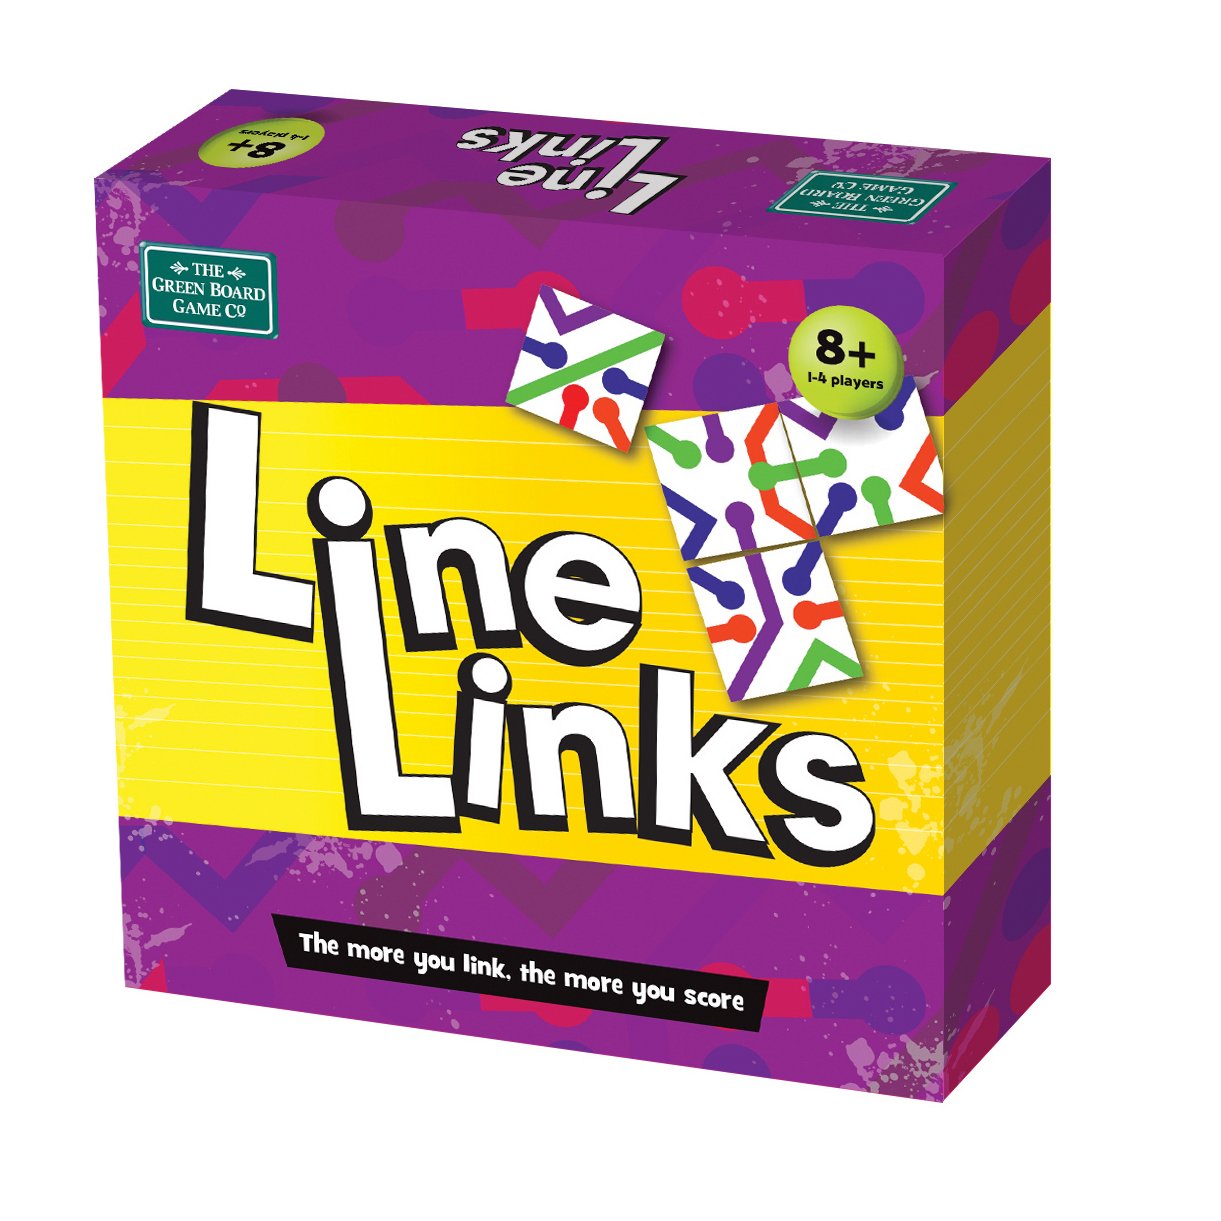 Board link. The Green Board game co. Line link. Card link.